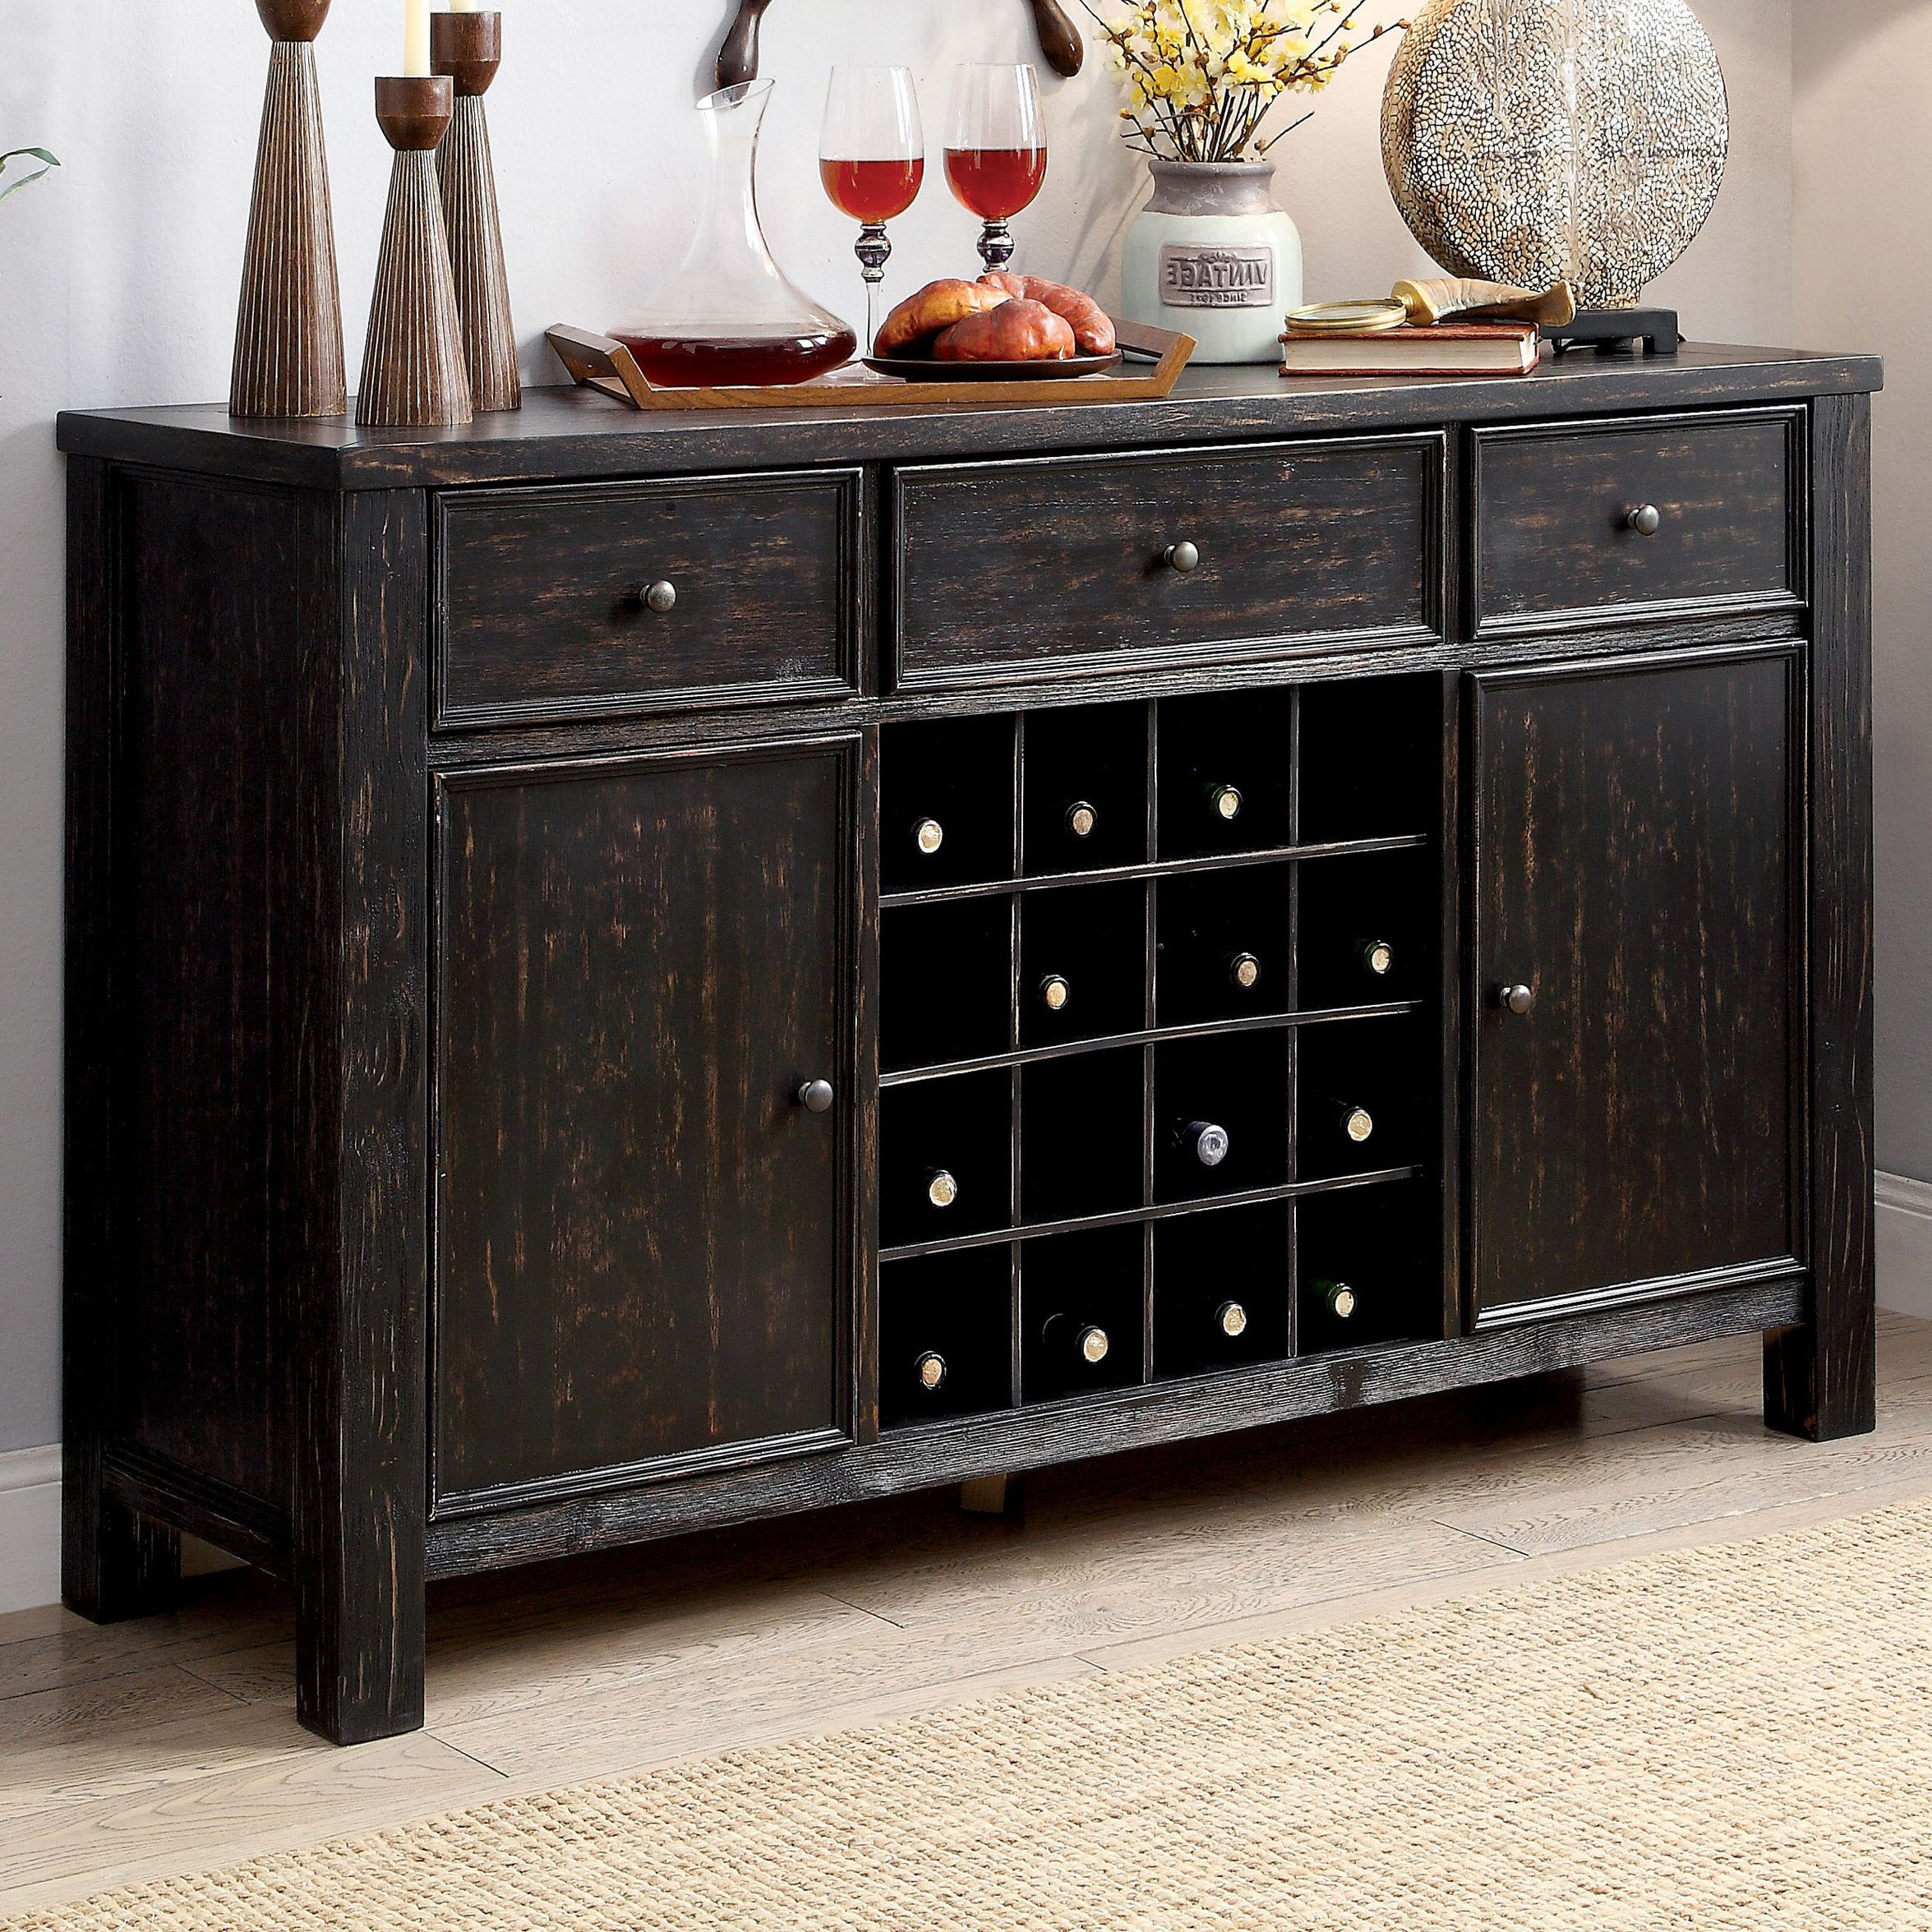 Yarmouth Sideboard With Regard To Perez Sideboards (Gallery 8 of 20)